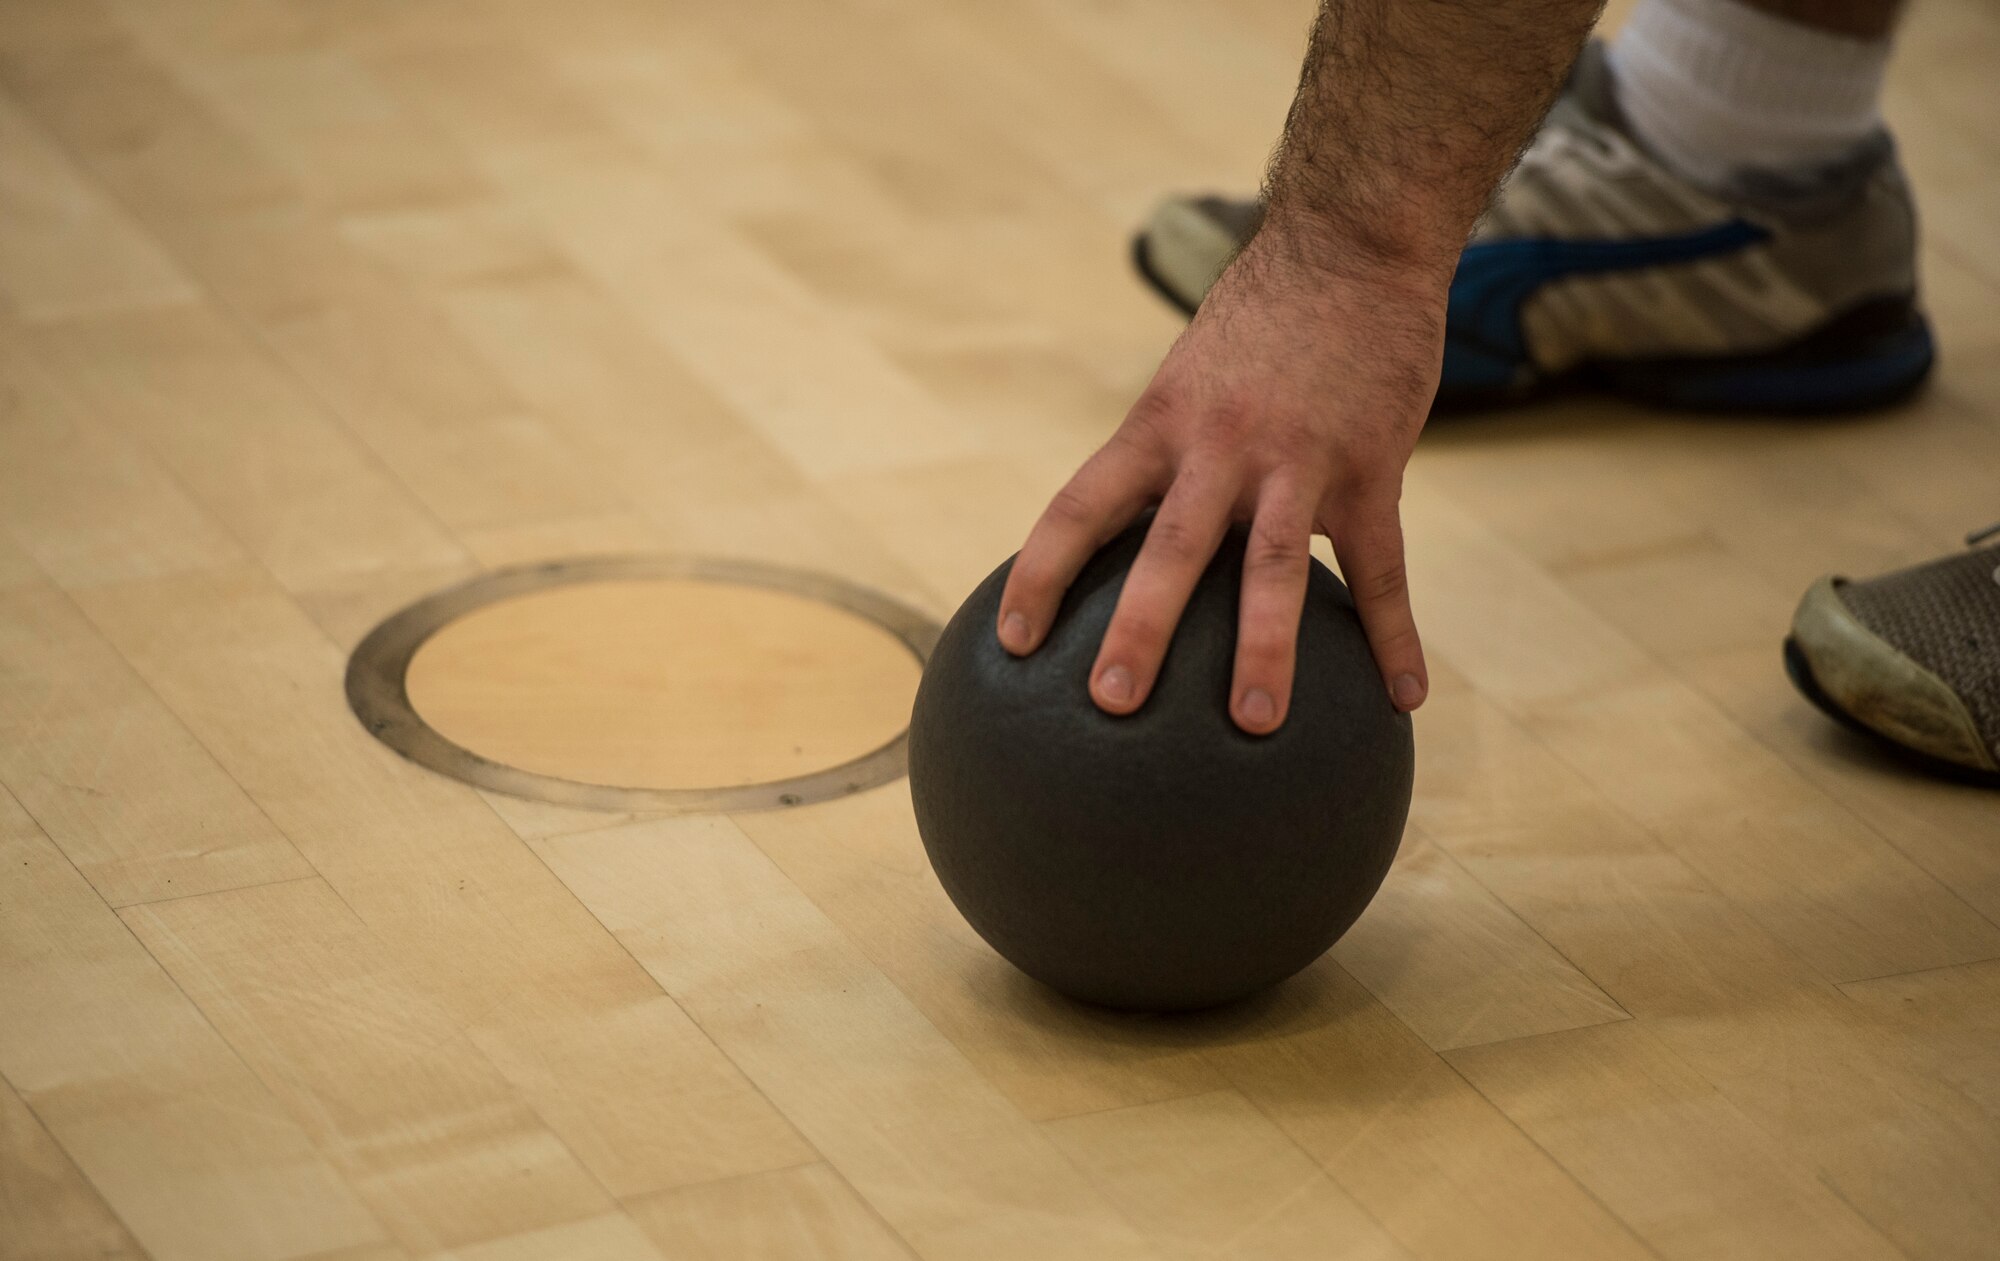 An Airman grabs a dodgeball during the RUFit Dodgeball Tournament in the fitness center Dec. 11, 2015, at Spangdahlem Air Base, Germany. Seven teams participated in the combat fitness-style of dodgeball with the ‘Mighty 606’ taking first place. (U.S. Air Force photo by Staff Sgt. Christopher Ruano/Released)